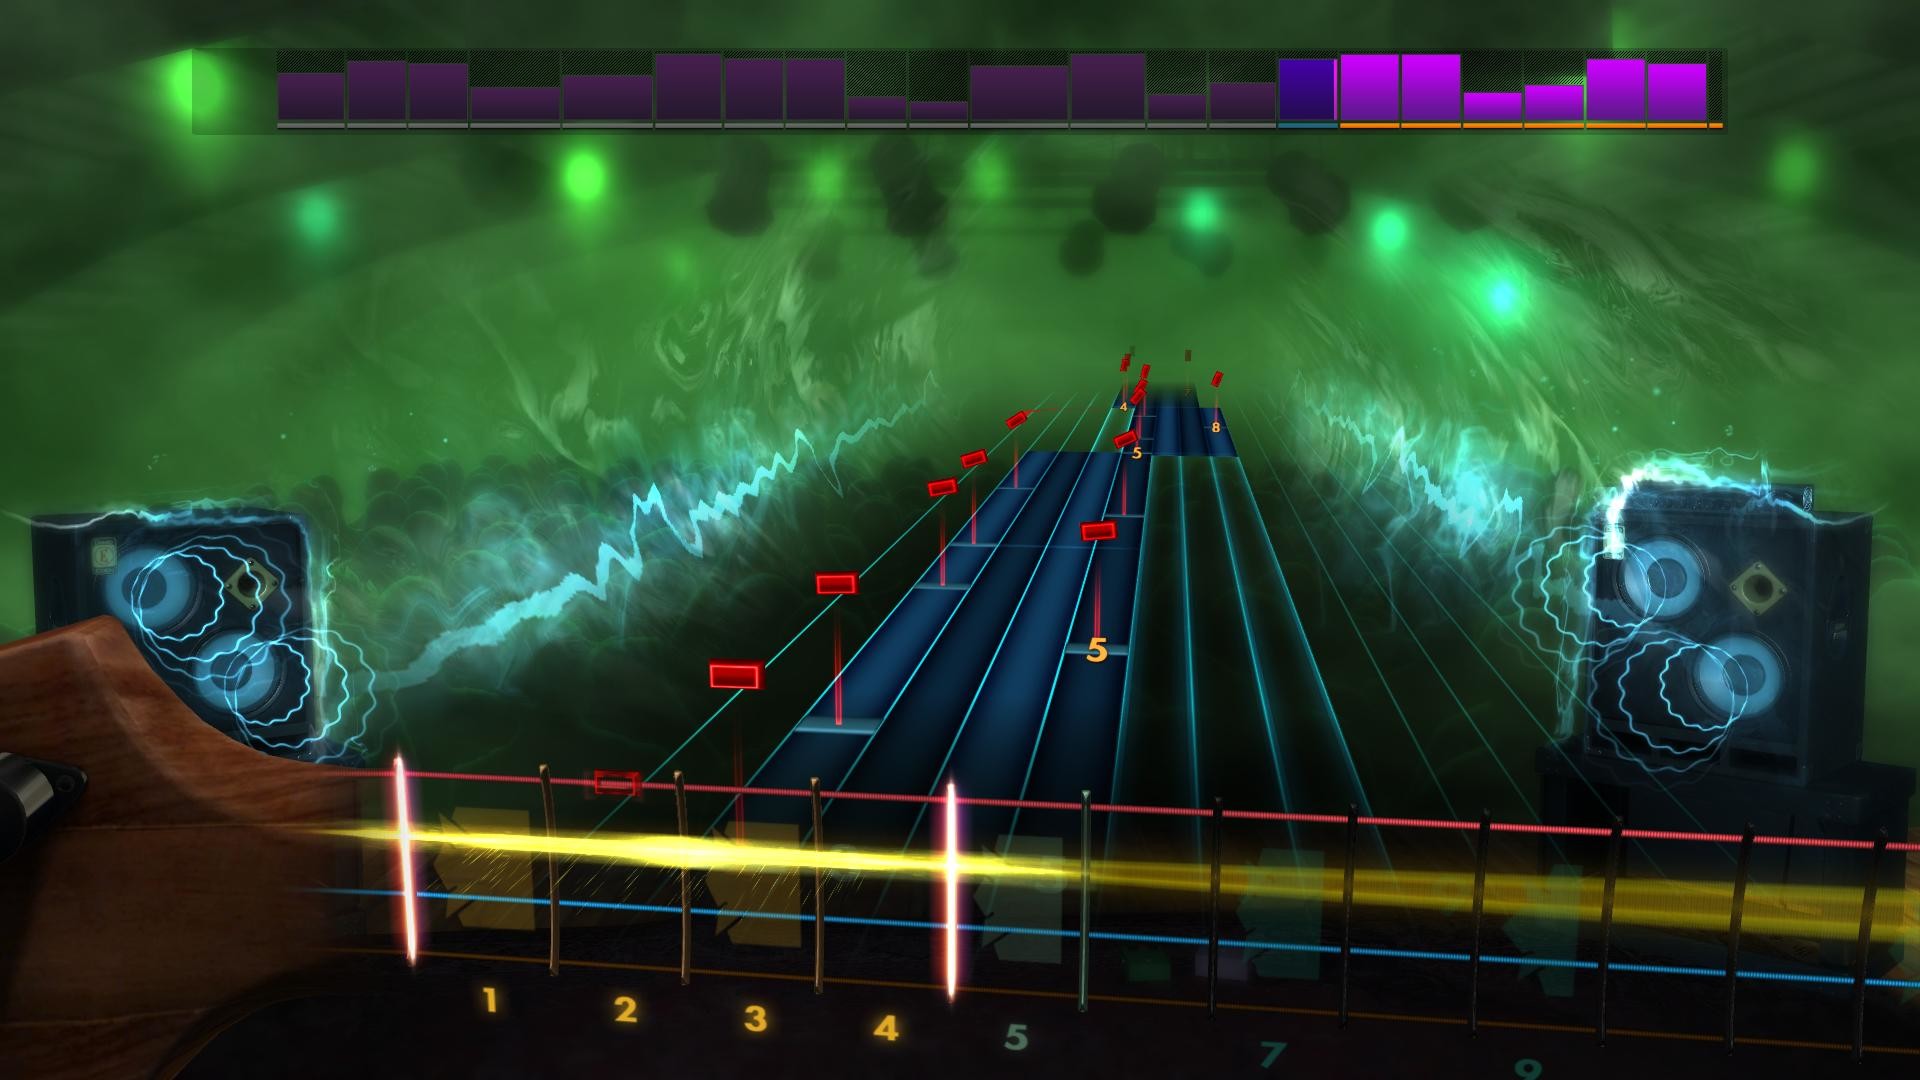 Rocksmith® 2014 – Anniversary Song Pack on Steam